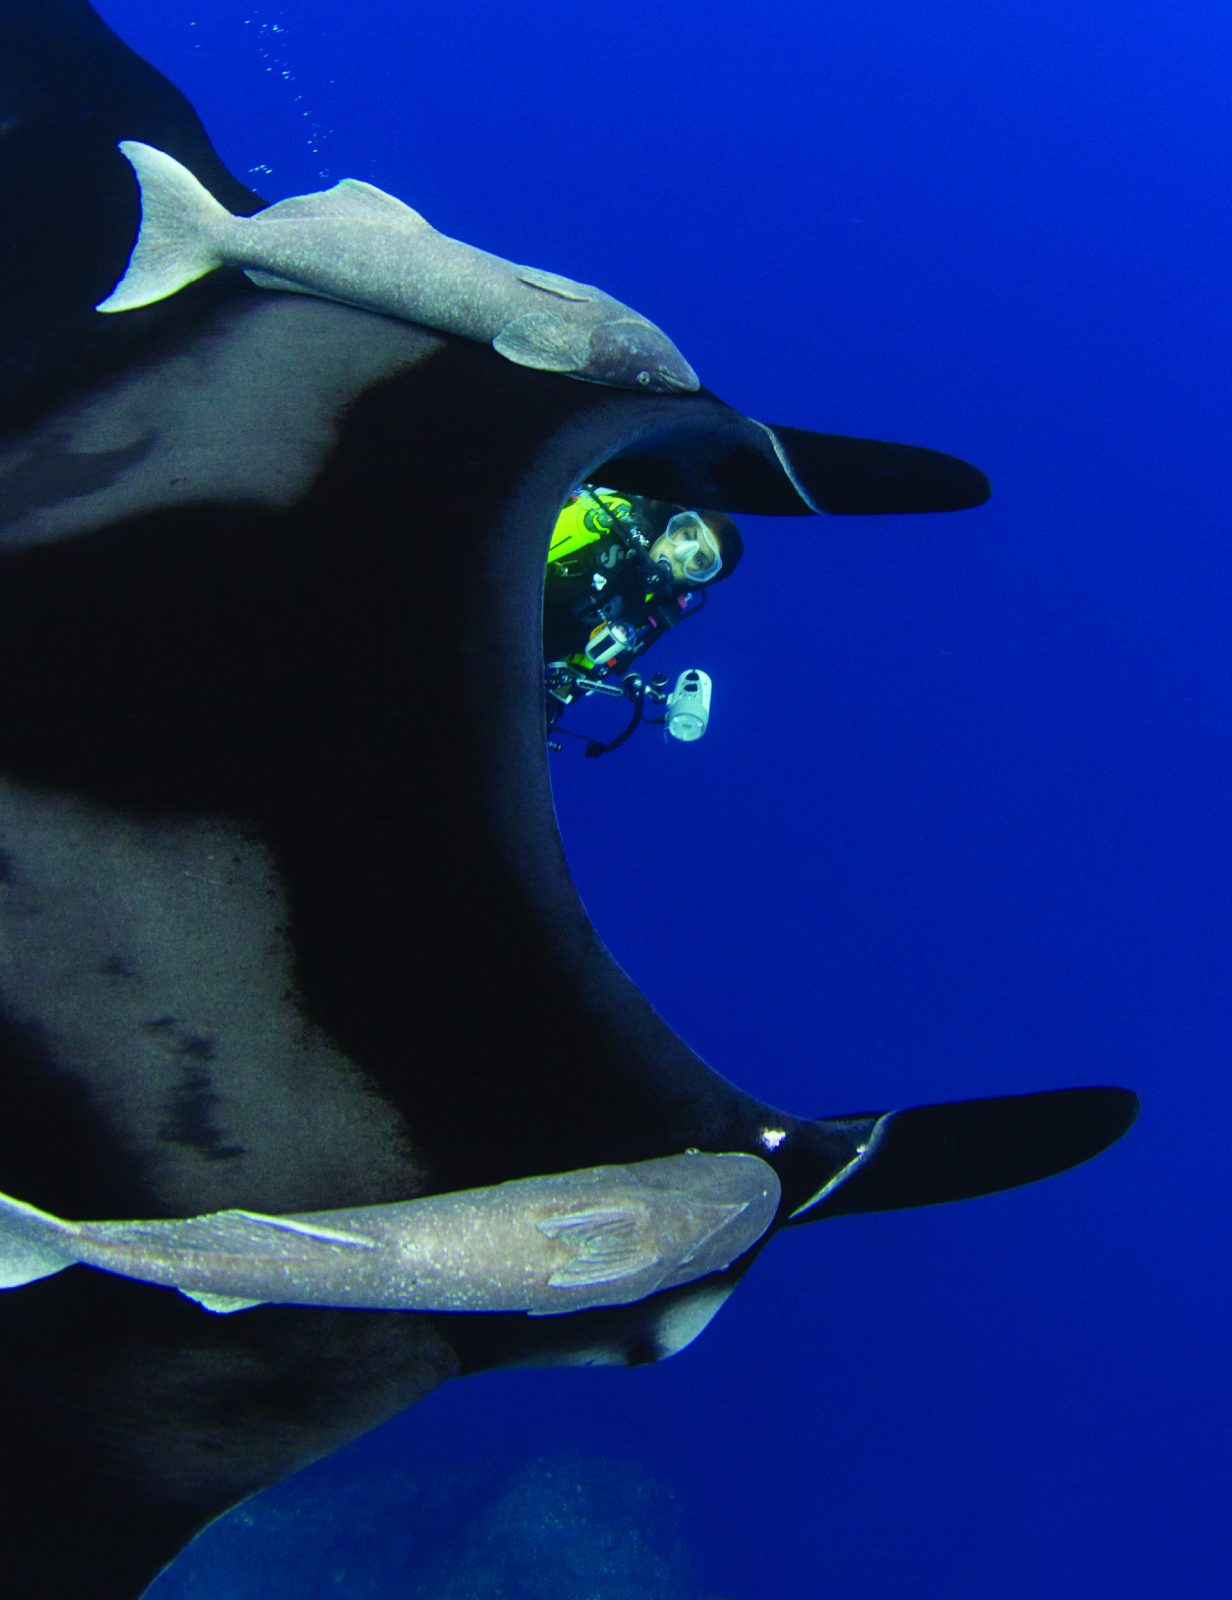 Oceanic manta rays grow up to 23 feet, feed on plankton, and are endangered